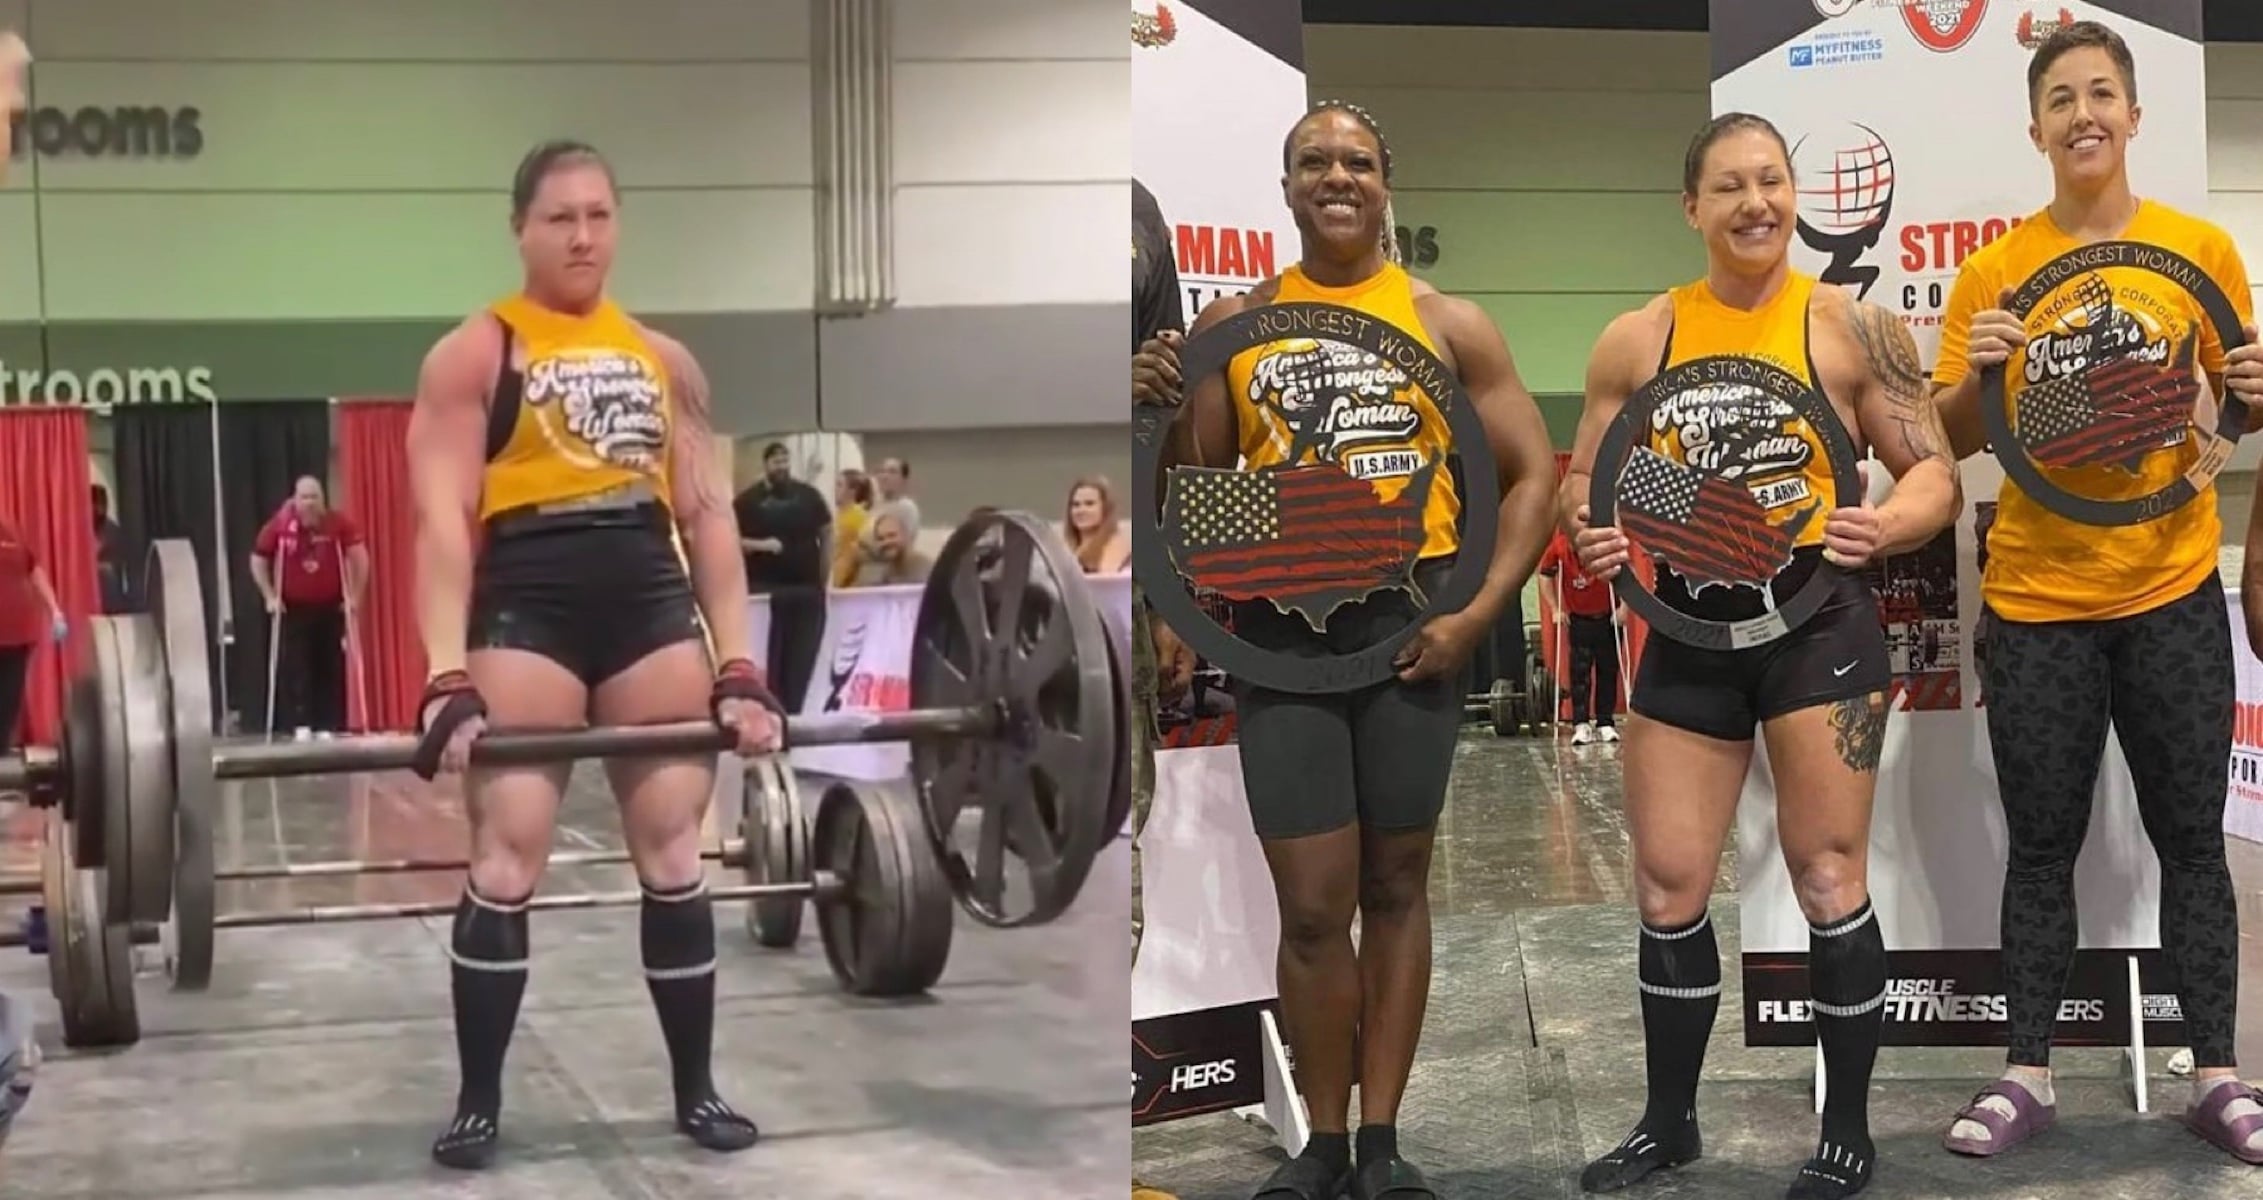 2021 Strongman Corporation Open Results